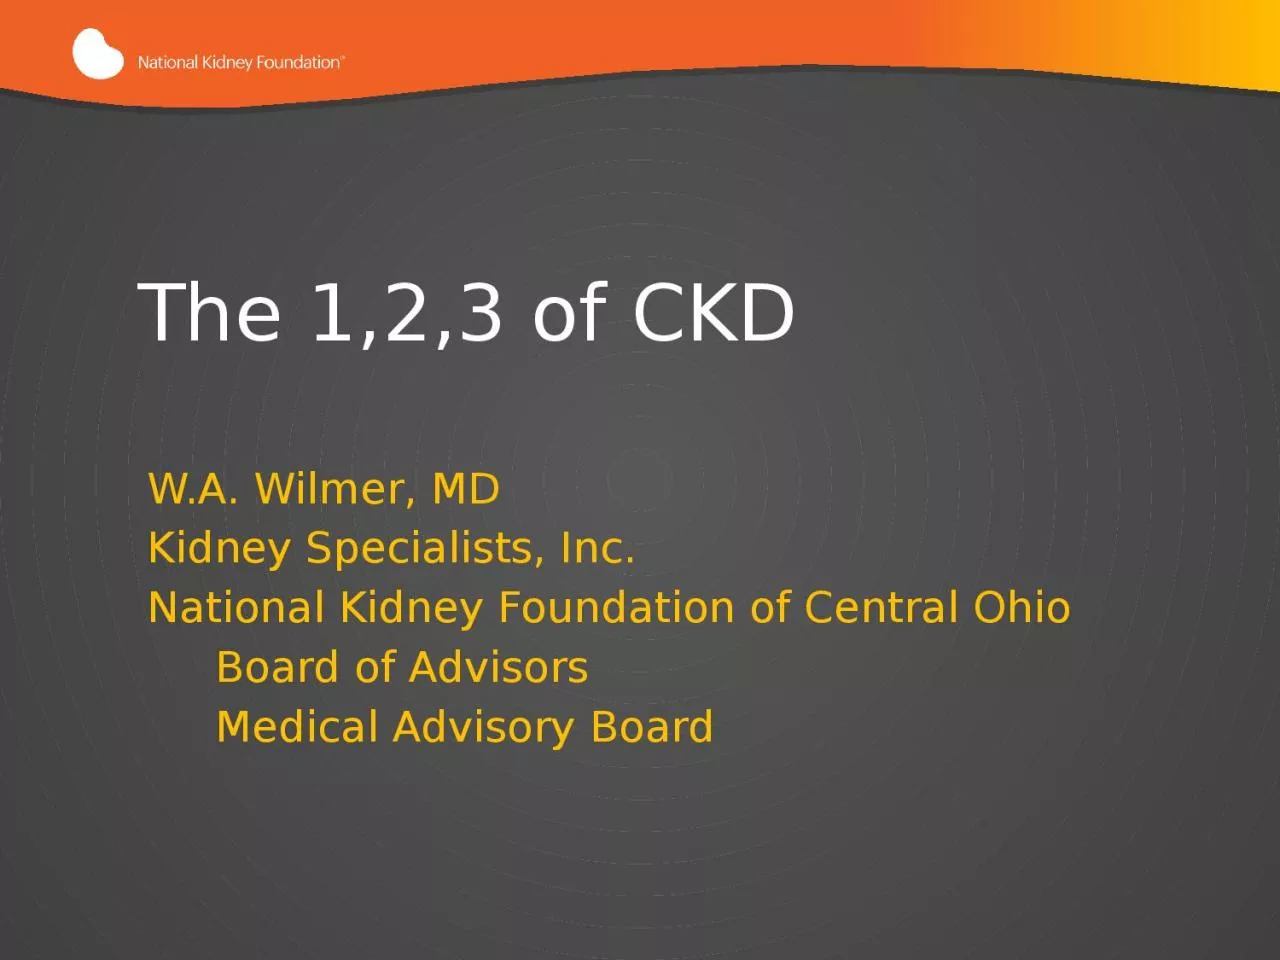 The 1,2,3 of CKD W.A. Wilmer, MD